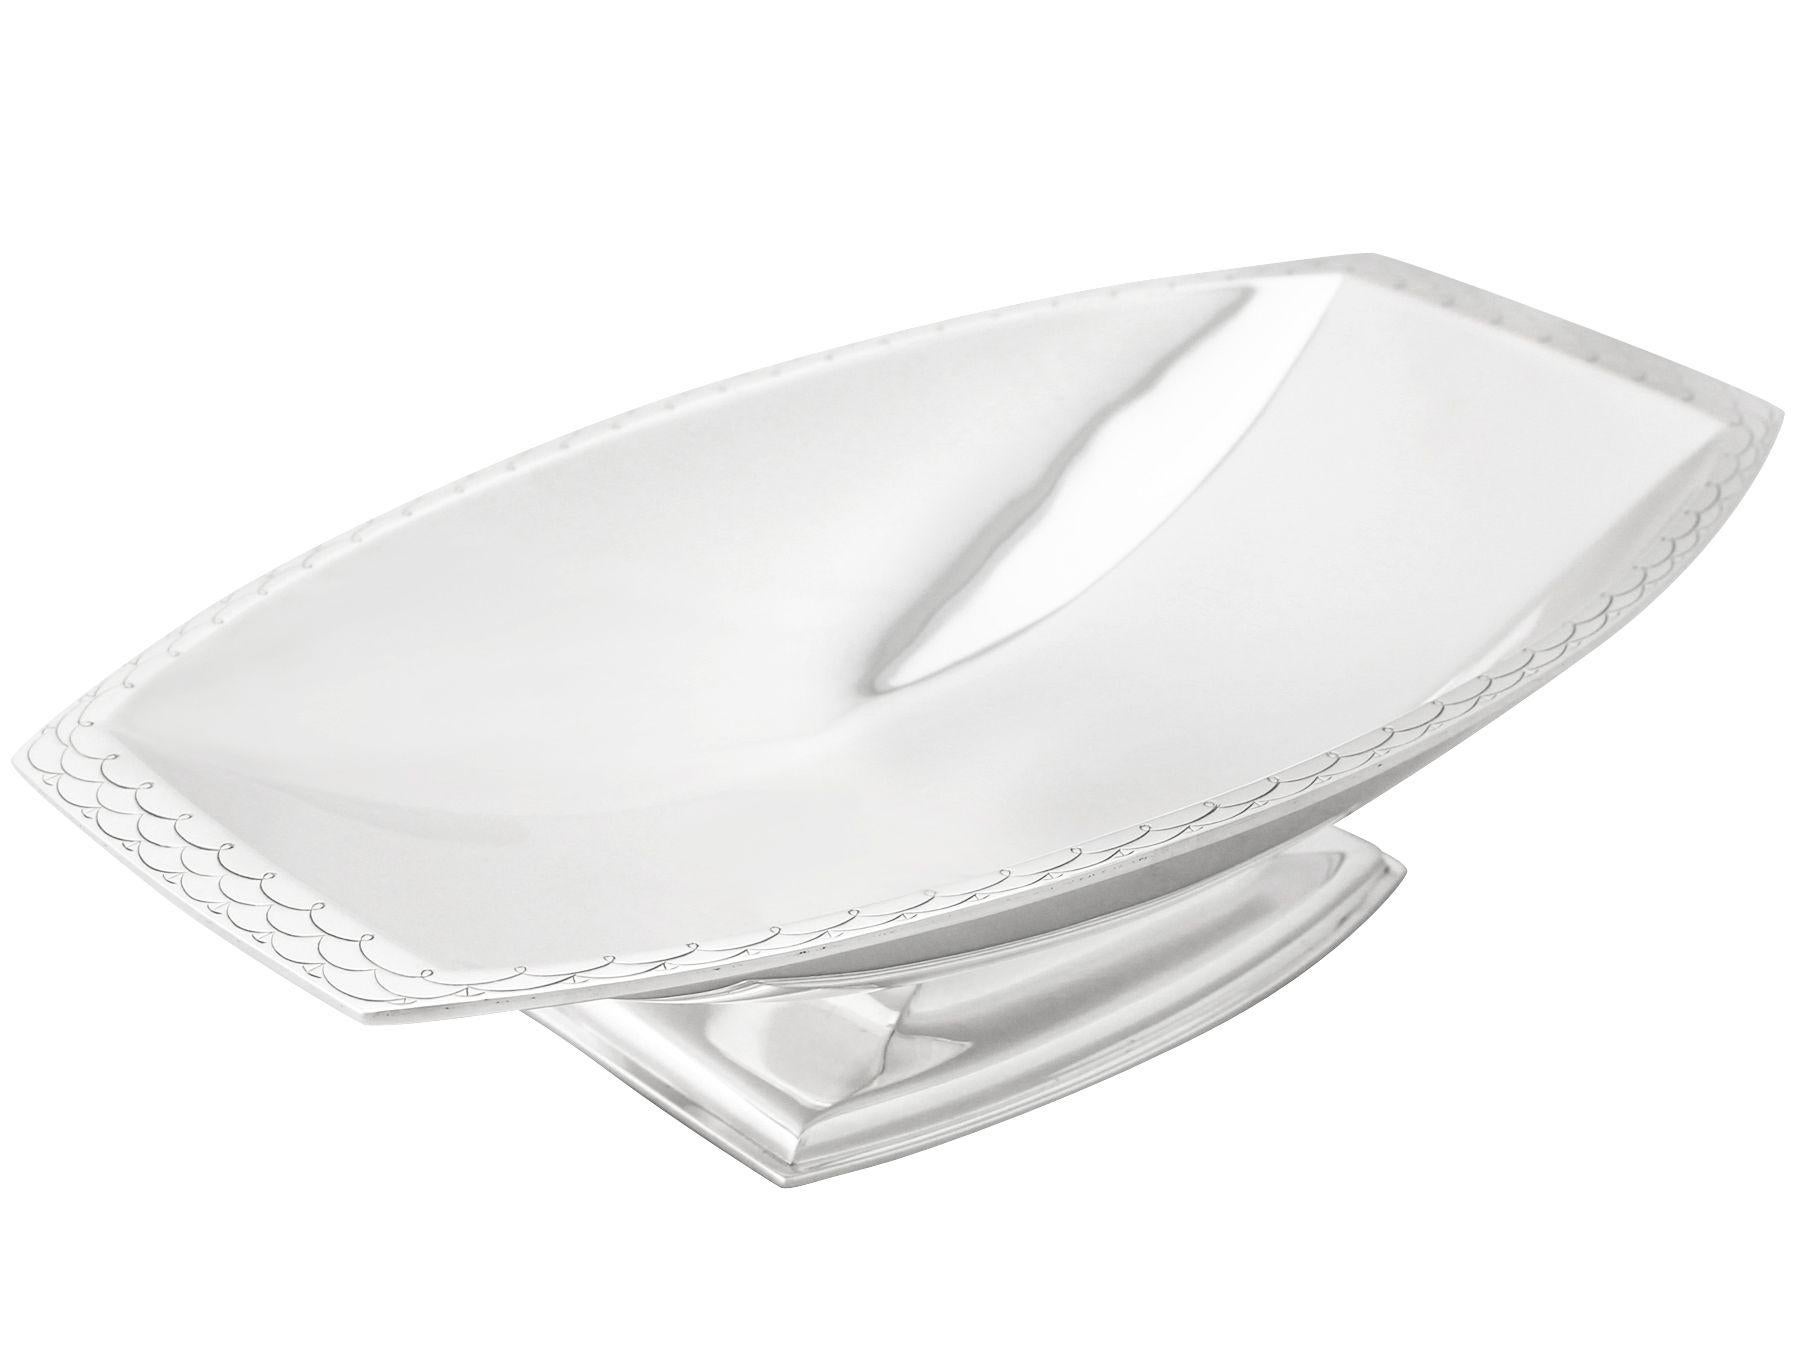 An exceptional, fine and impressive antique George VI English sterling silver bread dish in the Art Deco style; an addition to our range of ornamental silverware.

This exceptional antique George VI sterling silver bread dish has a rounded